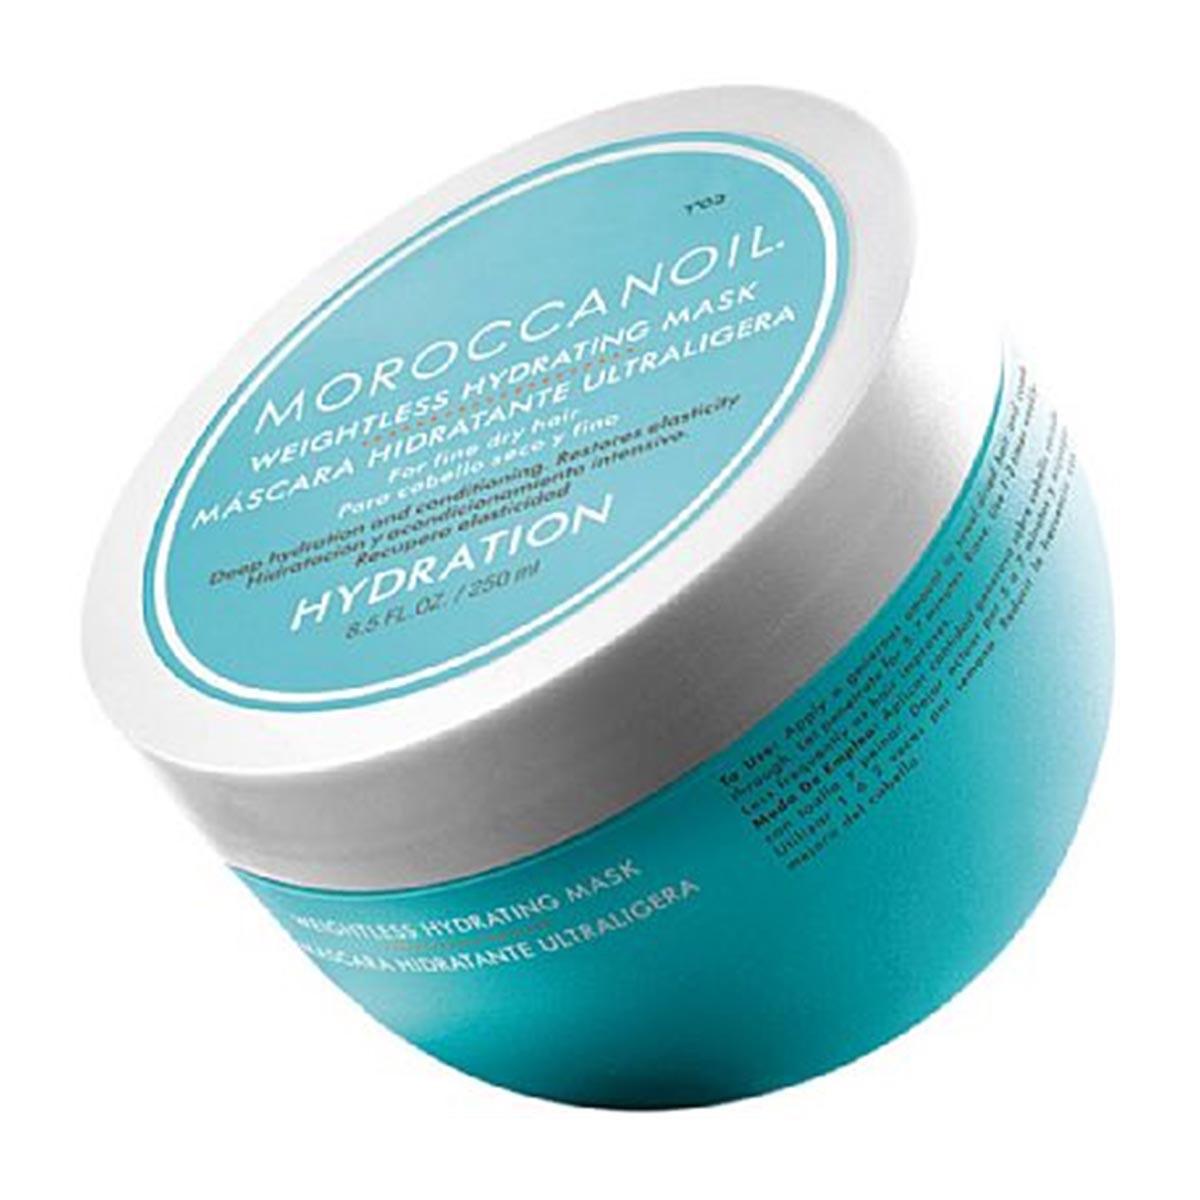 moroccanoil-mask-hydration-weightless-hydrating-250ml